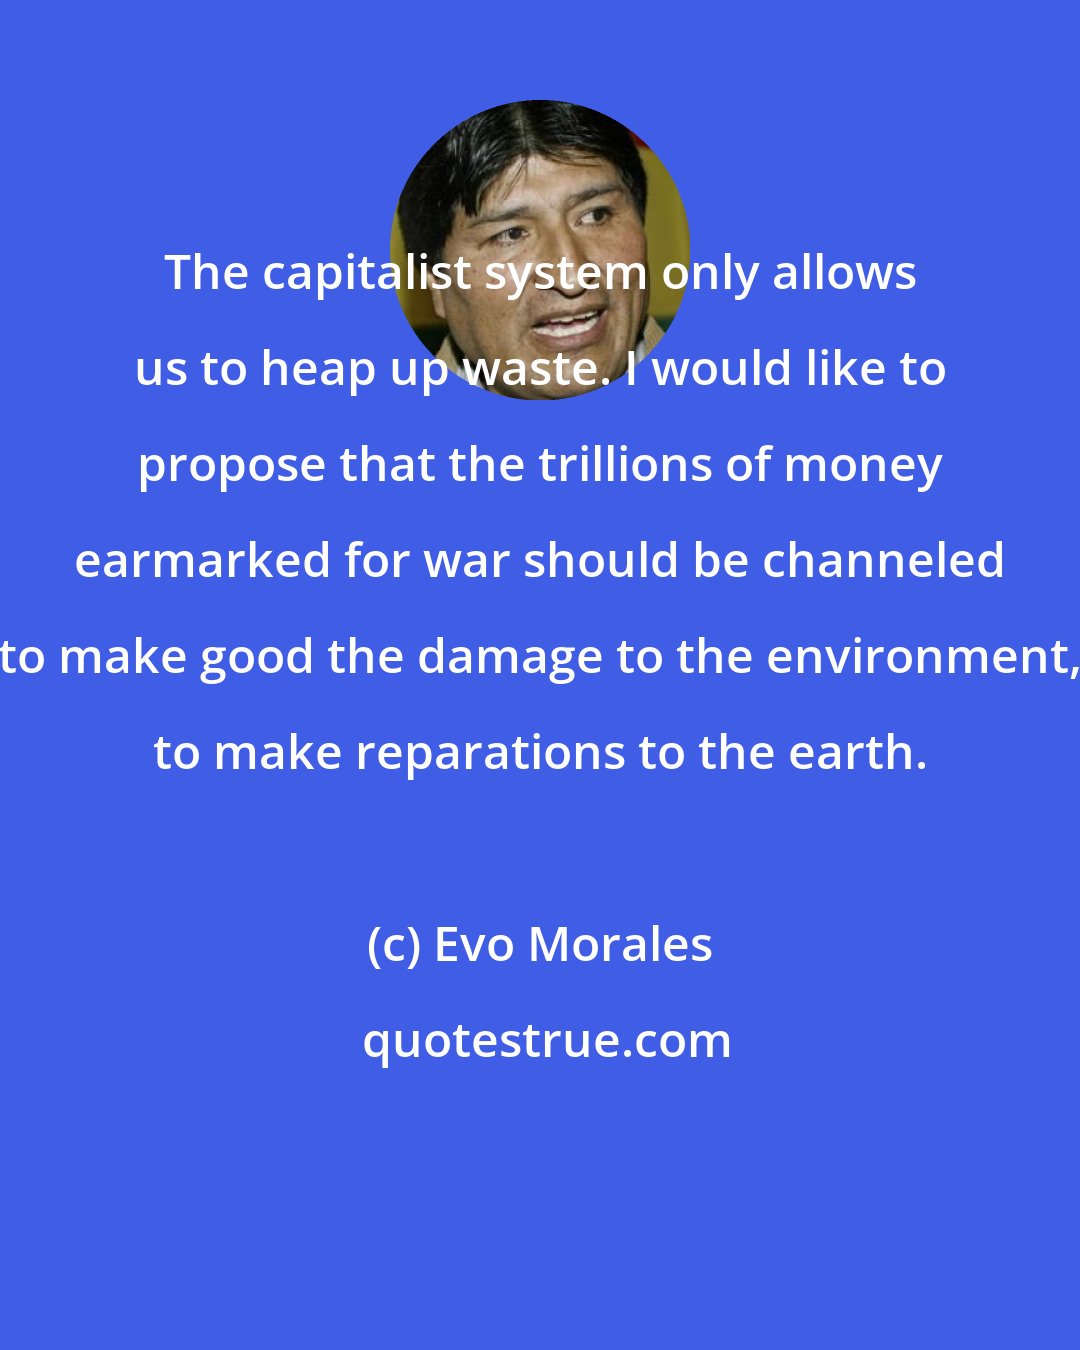 Evo Morales: The capitalist system only allows us to heap up waste. I would like to propose that the trillions of money earmarked for war should be channeled to make good the damage to the environment, to make reparations to the earth.